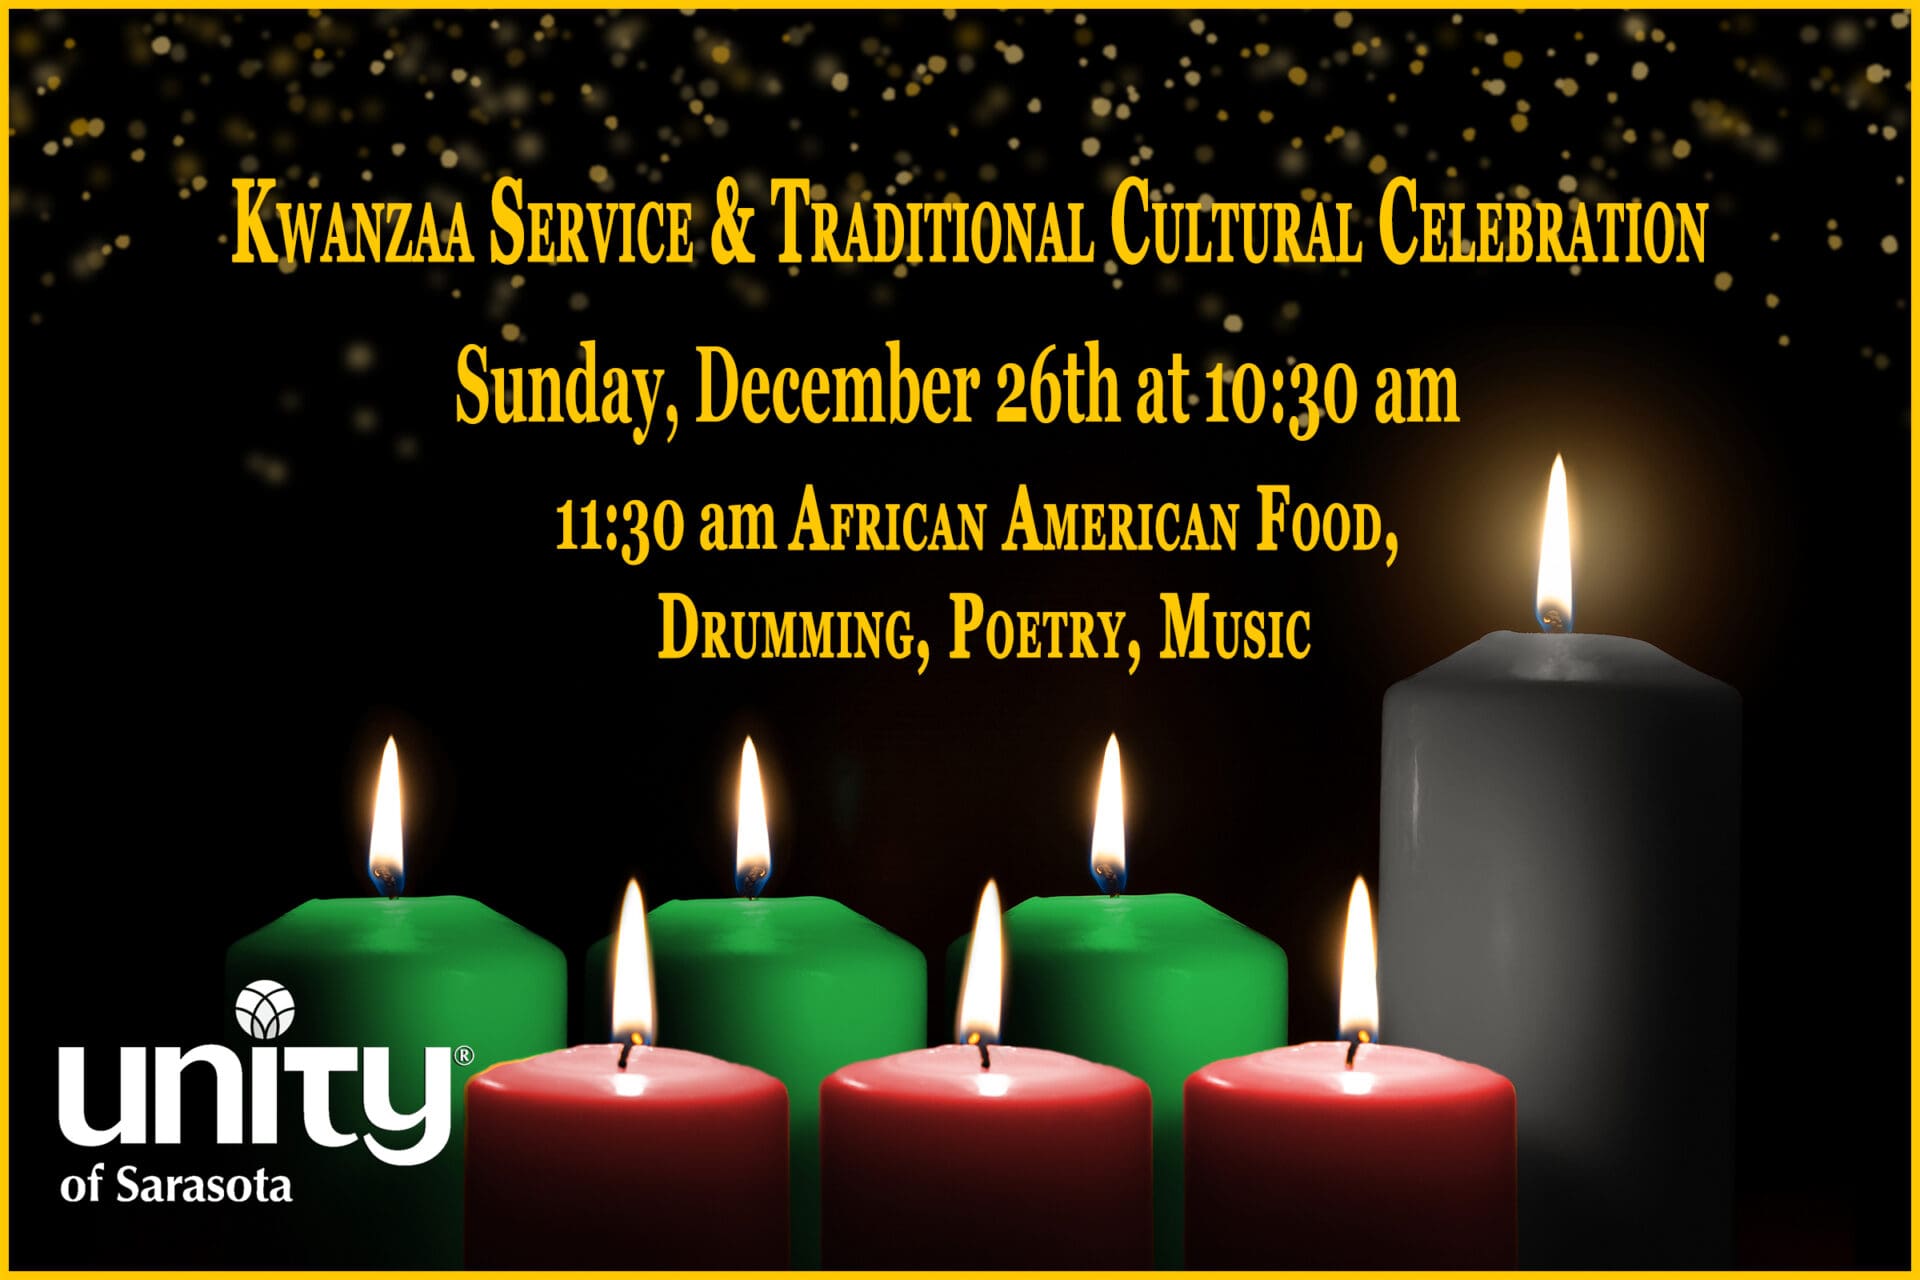 Kwanzaa Service & Traditional Cultural Celebration at Unity of Sarasota on Sunday, December 26th